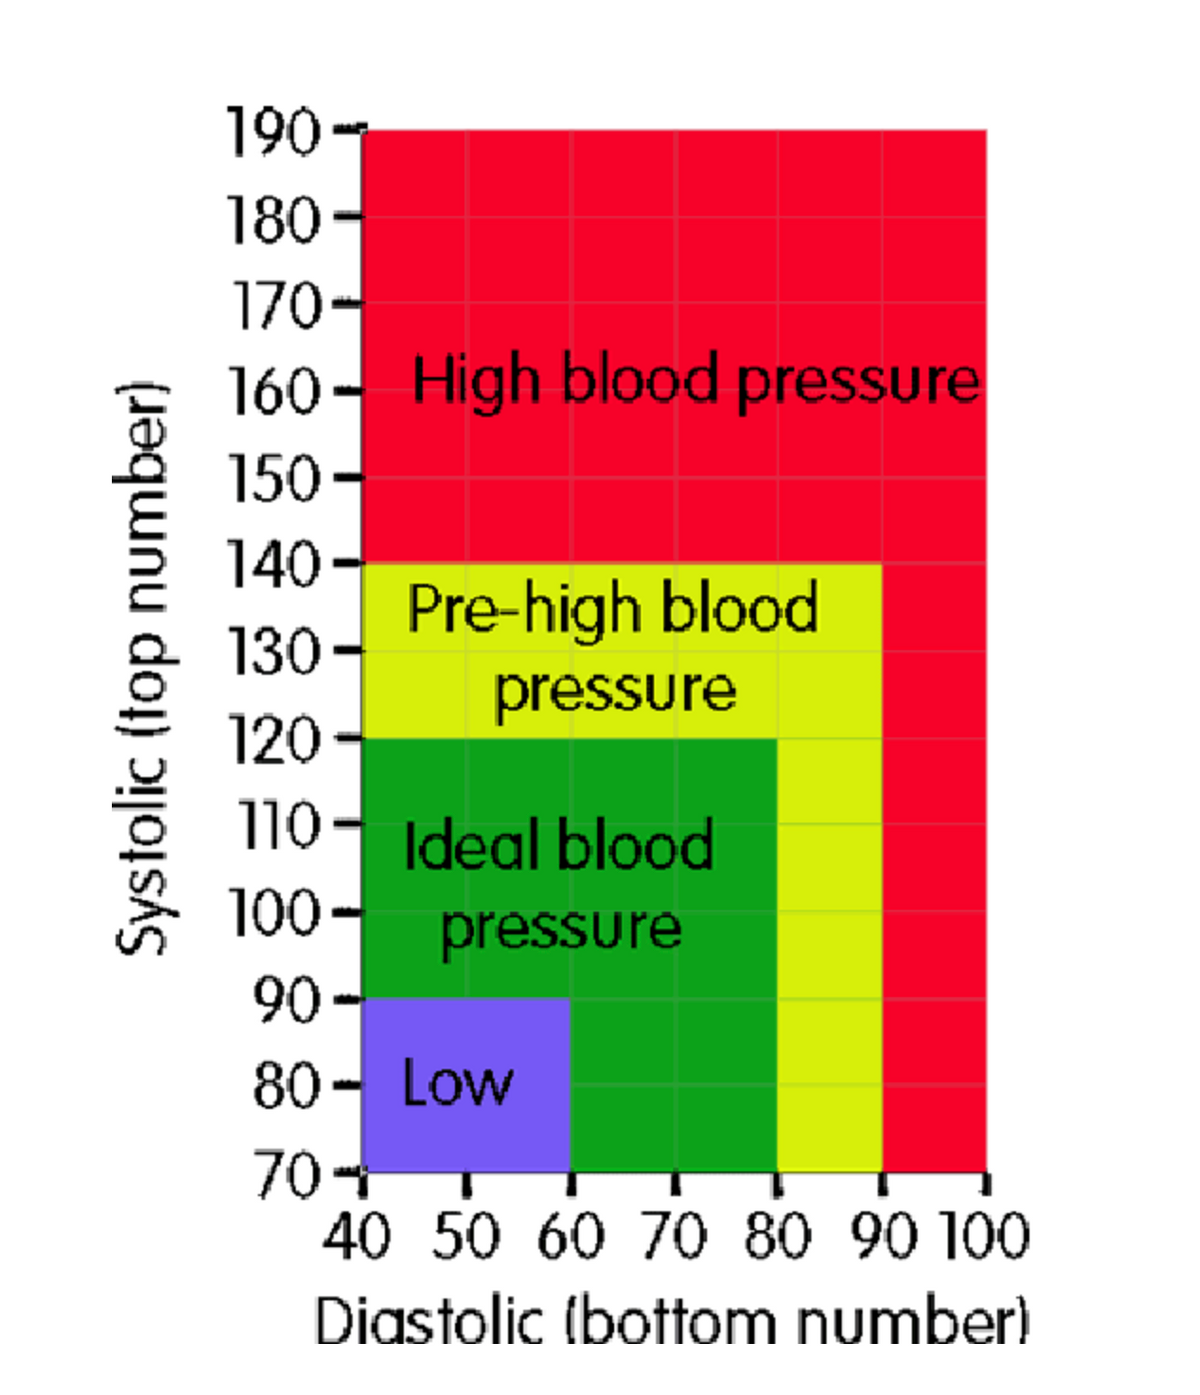 190-
180-
170-
160- High blood pressure
150-
140-
Pre-high blood
130-
pressure
120
110- Ideal blood
100- pressure
90 -
80- Low
70-
40 50 60 70 80 90 100
Diastolic (bottom number)
Systolic (top number)
